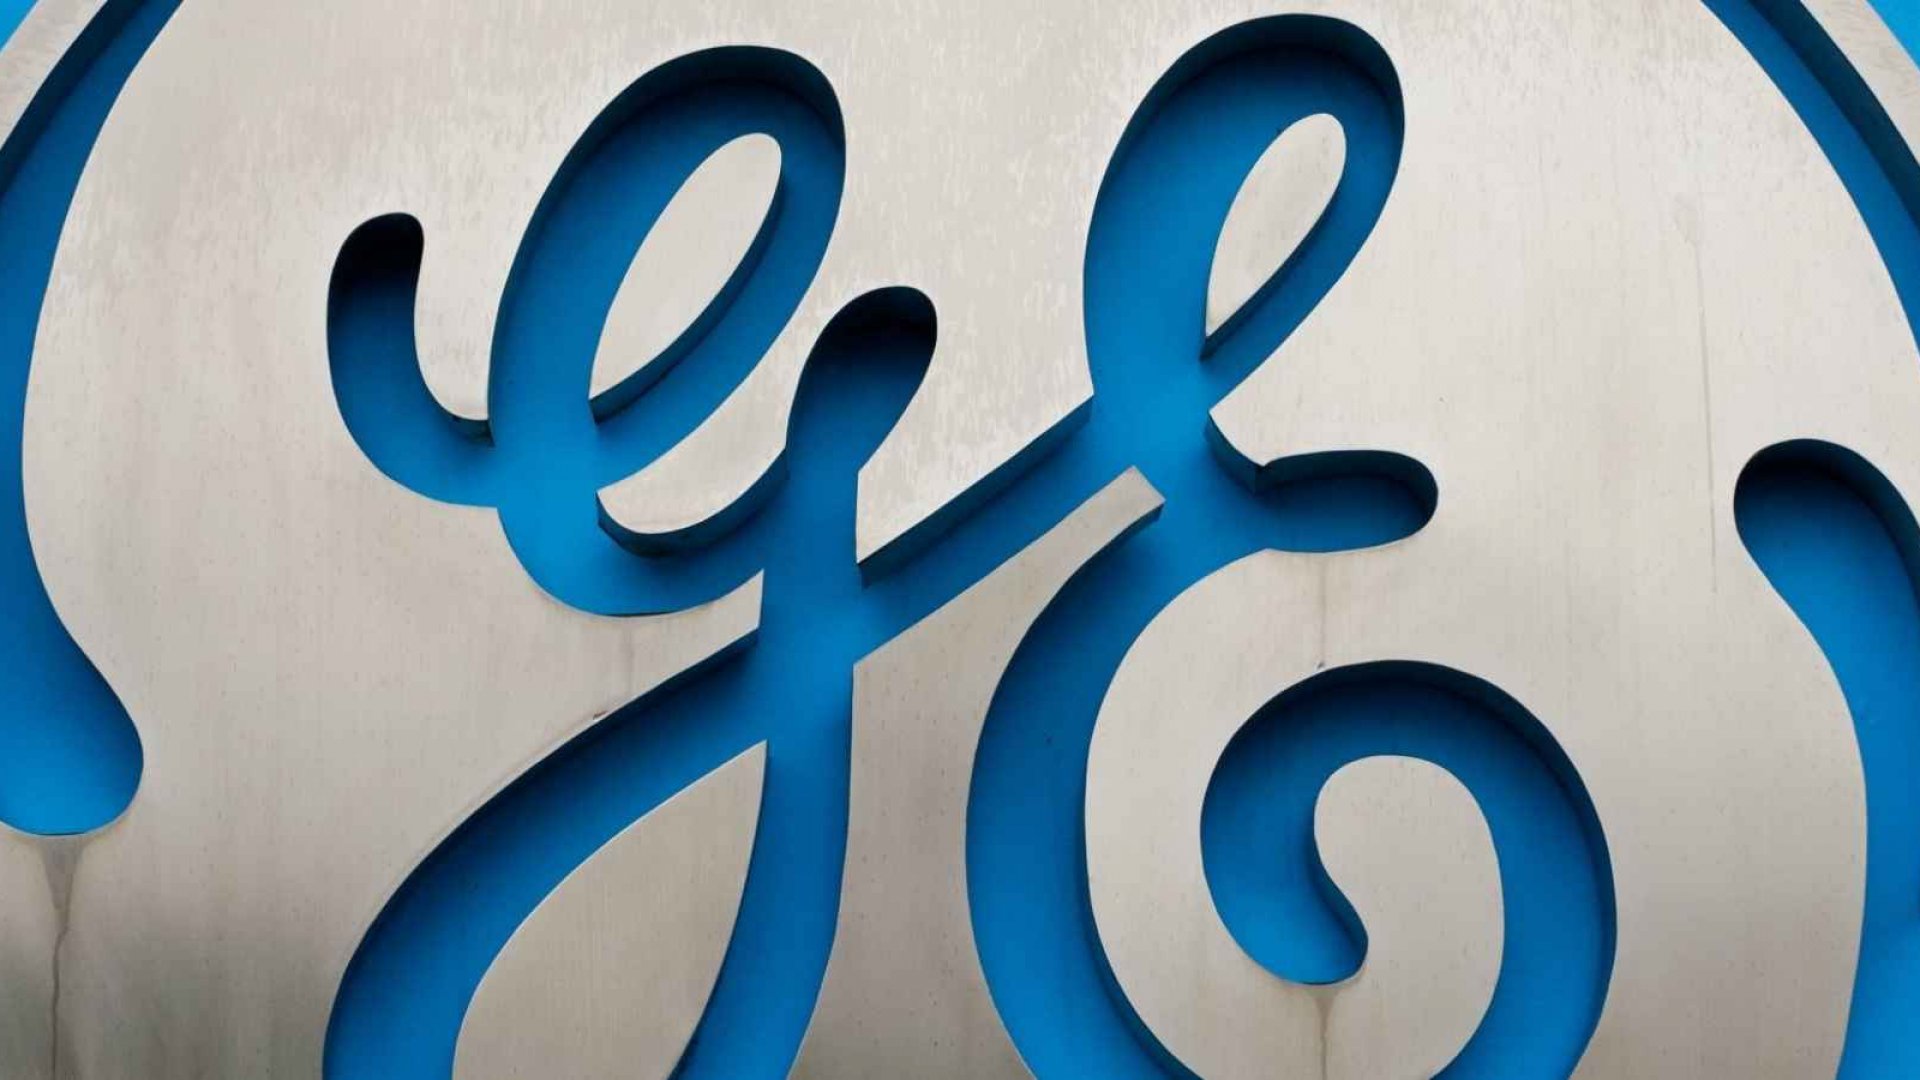 General Electric Acquires 3D Printing Firms for $1.4 Billion